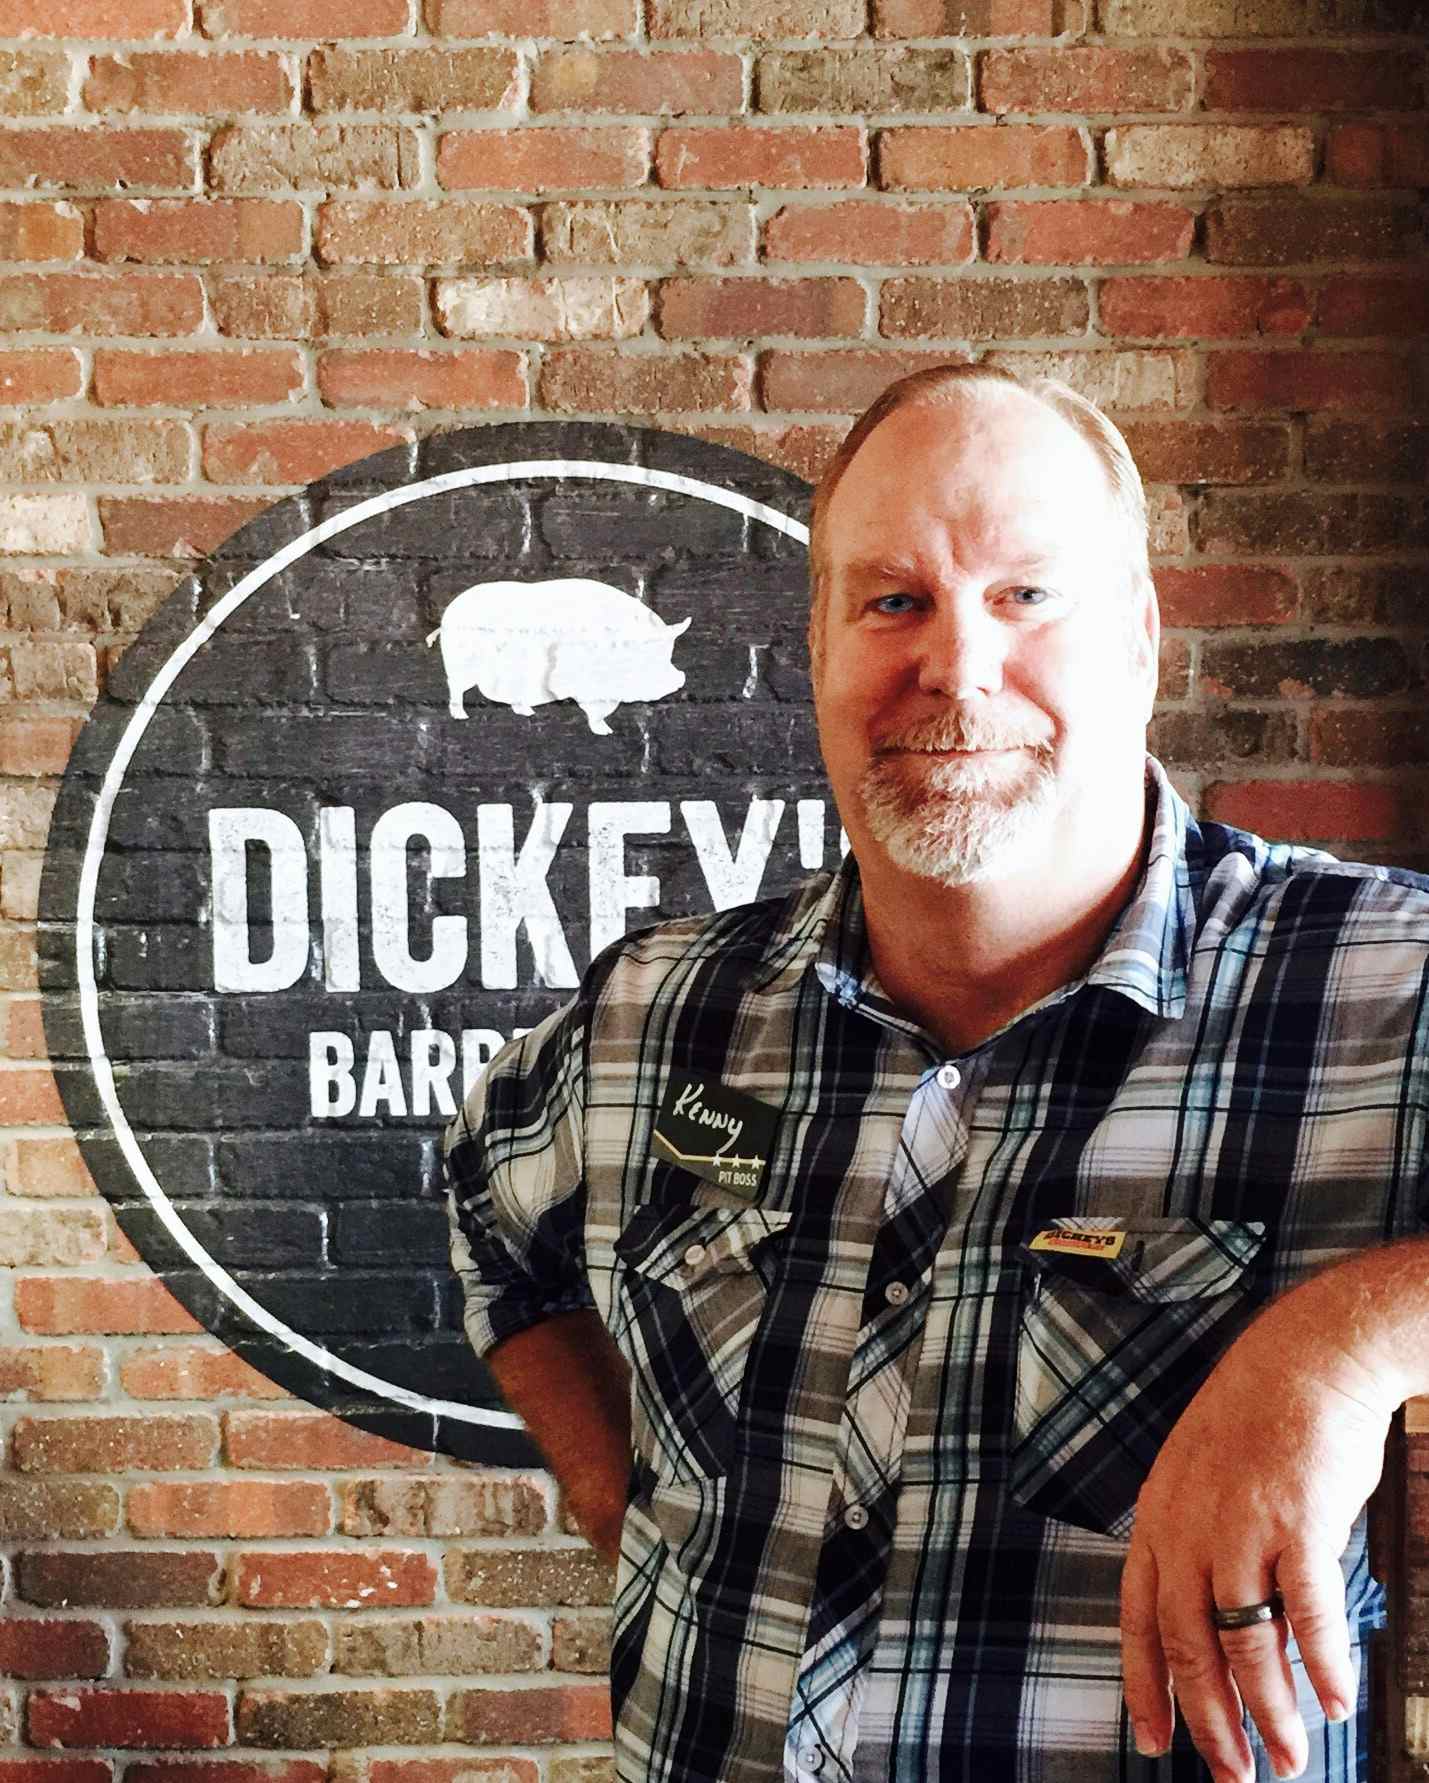 Dickey’s Barbecue Pit Brings a New Fast Casual Barbecue Option to New Braunfels